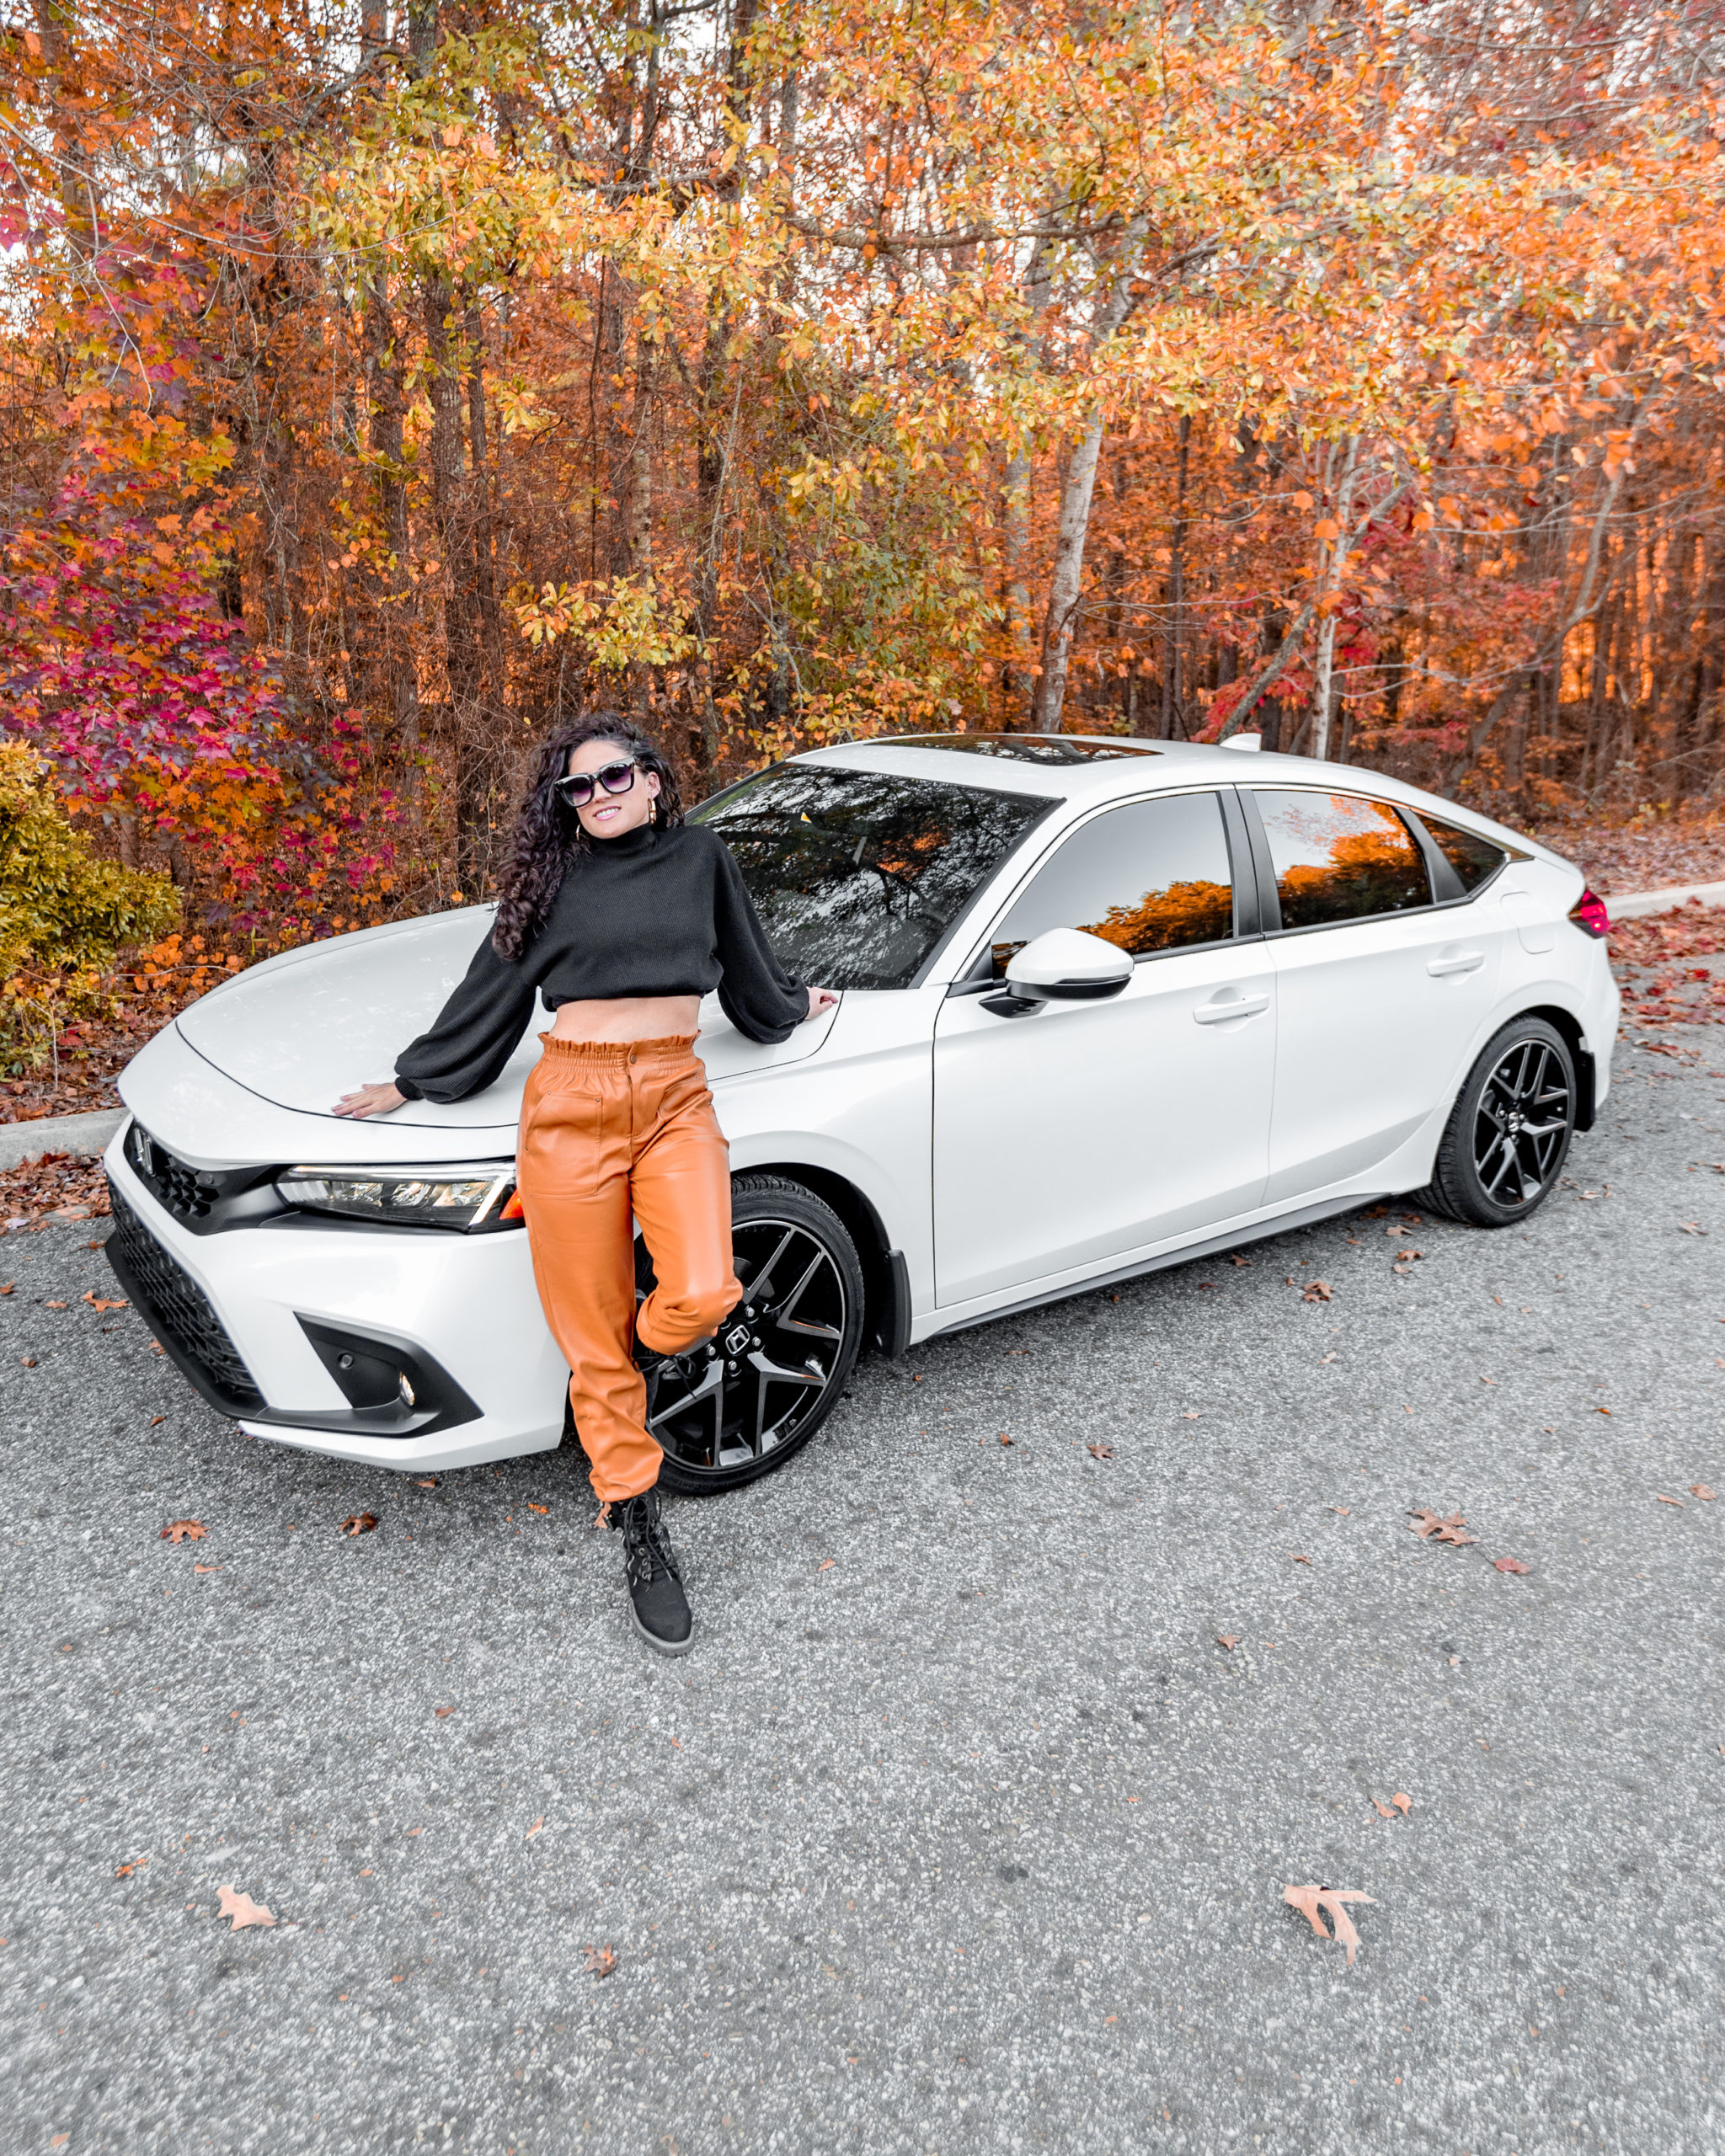 2022 Honda Civic Sport Touring, New Honda Civic, Features of the New honda Civic, Best sporty affordable cars, best style and travel bloggers, top atlanta bloggers, Erica Valentin, Wander in Color Blog, Faux leather joggers, fall outfit ideas, fall outfit inspo, 2021 fall trends, how to style combat boots, how to style faux leather joggers, how to purchase a new car in 2021, car buying process, all black rims, hatchback honda civic